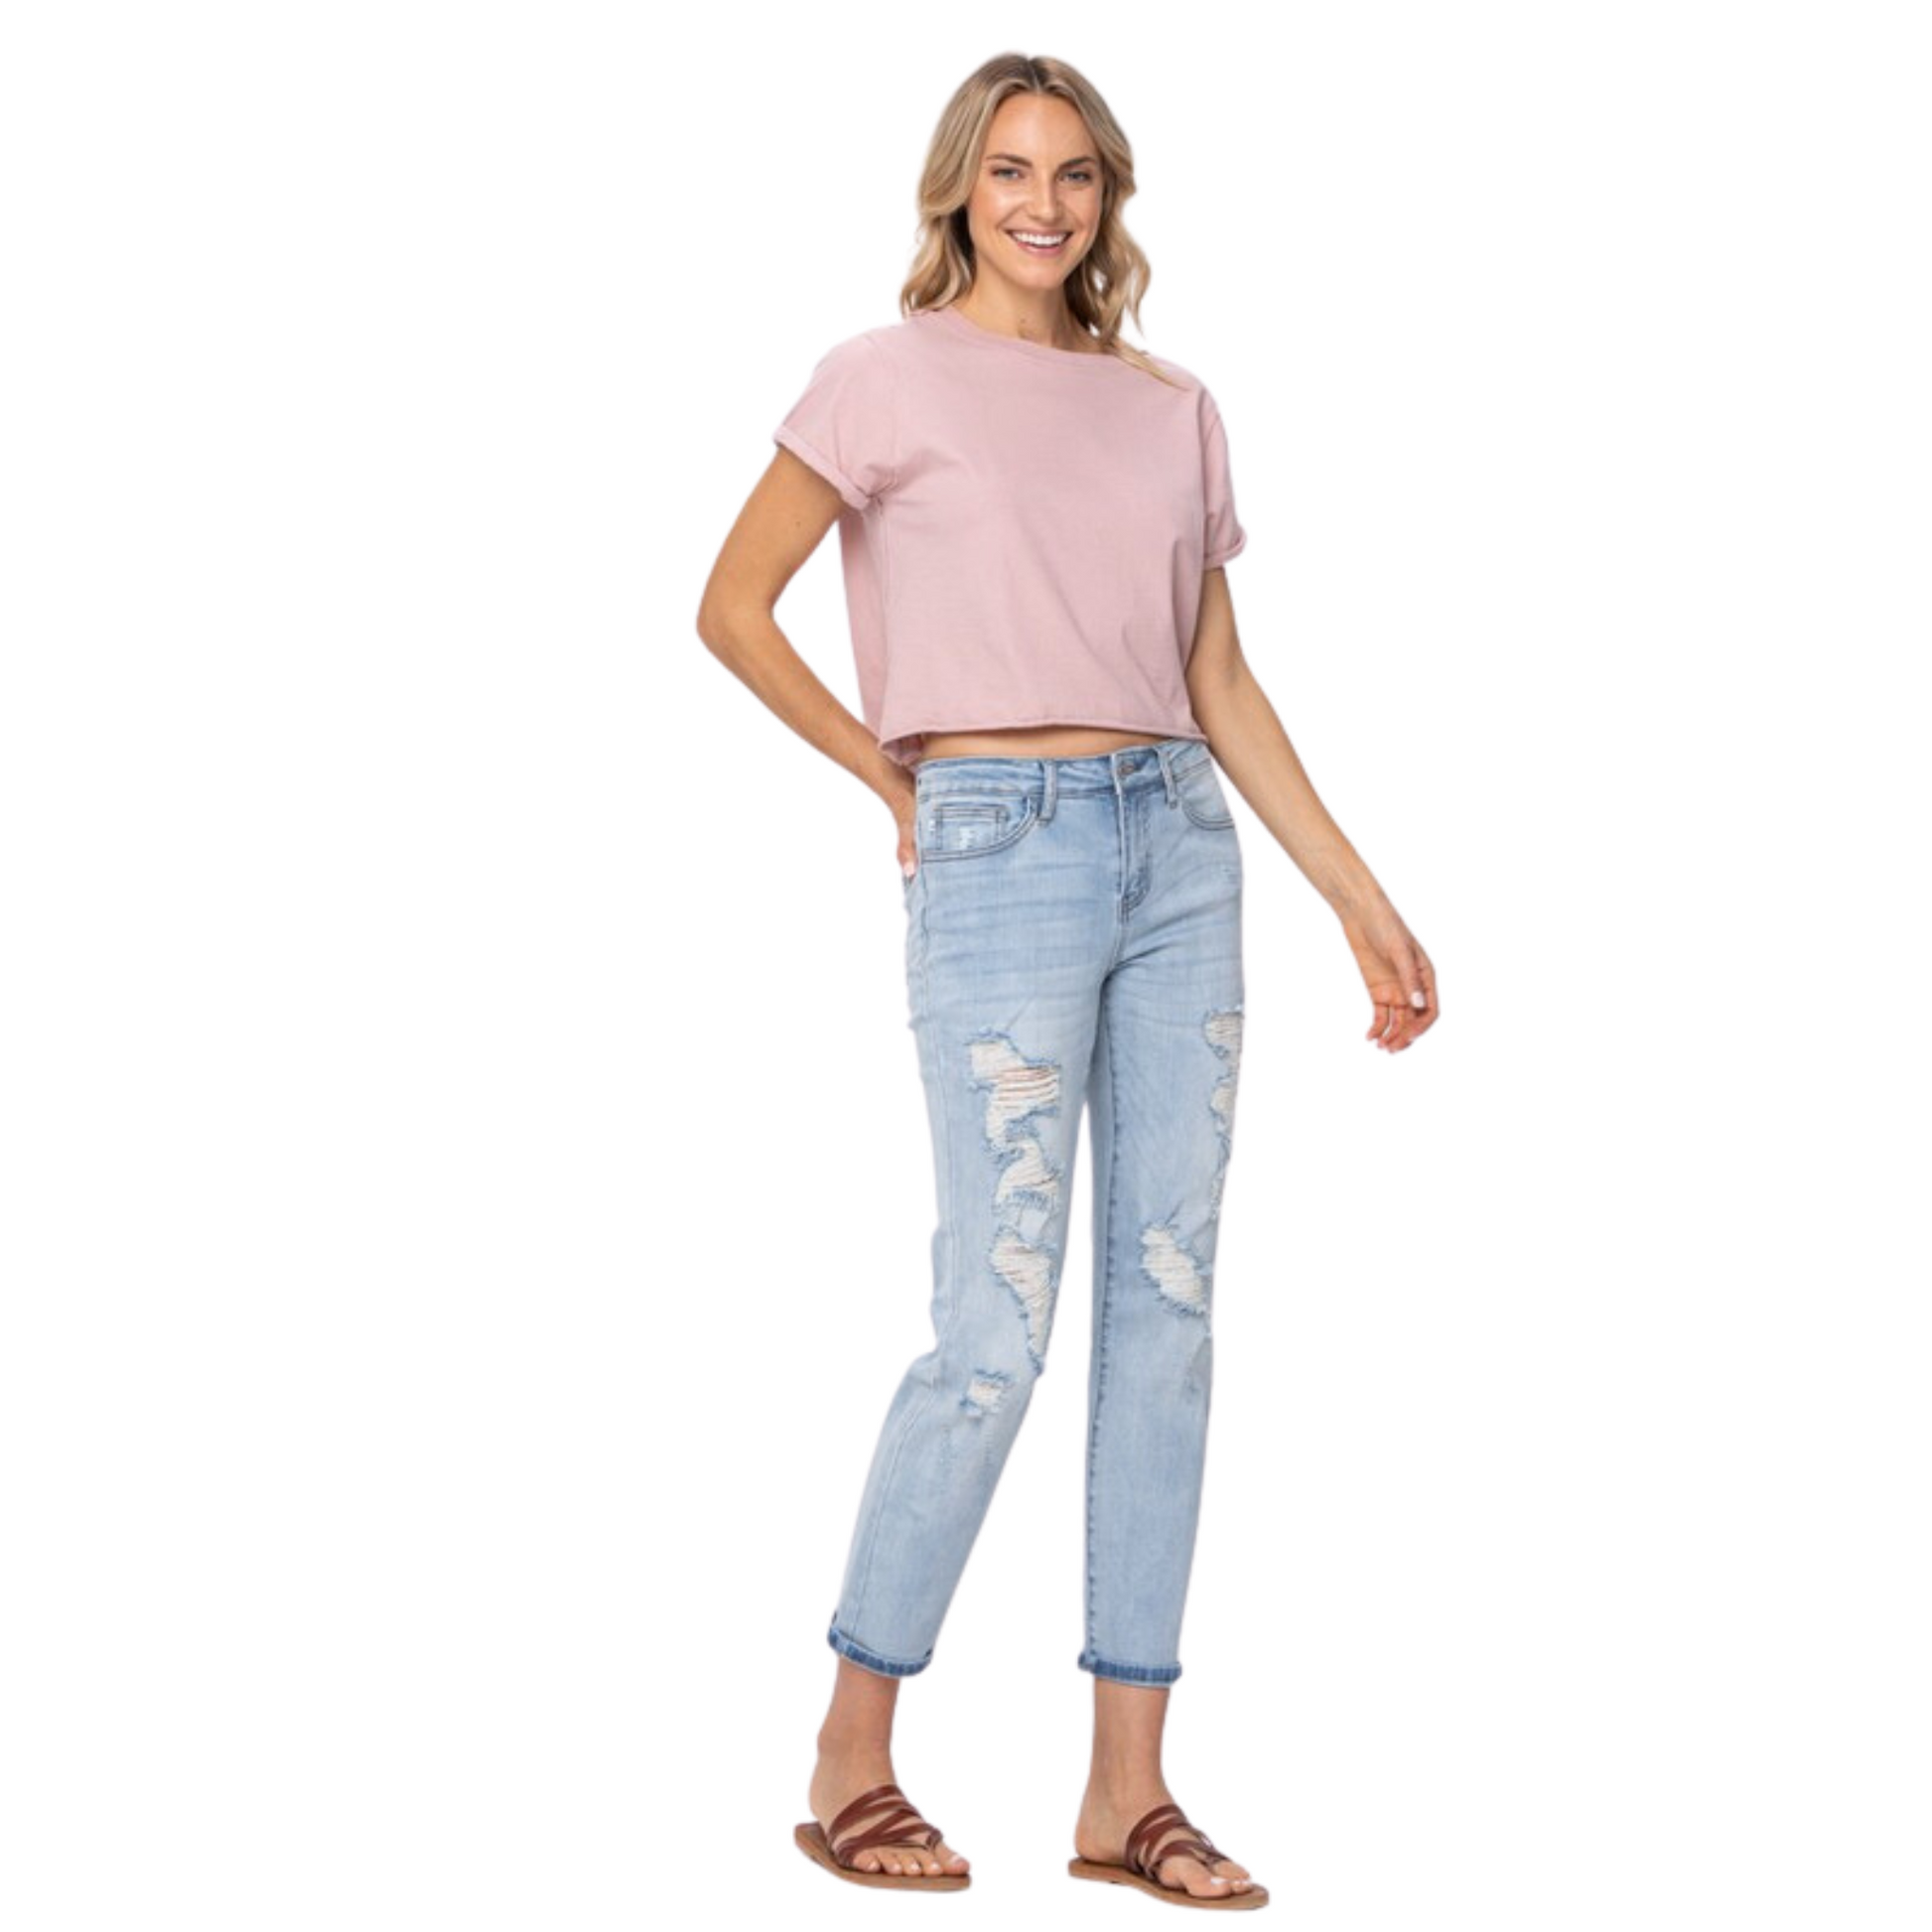 These mid-rise Destroyed Boyfriend Jeans by Judy Blue make a great addition to any wardrobe. The light wash denim pairs well with a variety of looks, providing a unique twist to your favorite styles. Flexible yet durable, these jeans are perfect for dressy occasions or casual weekend wear.